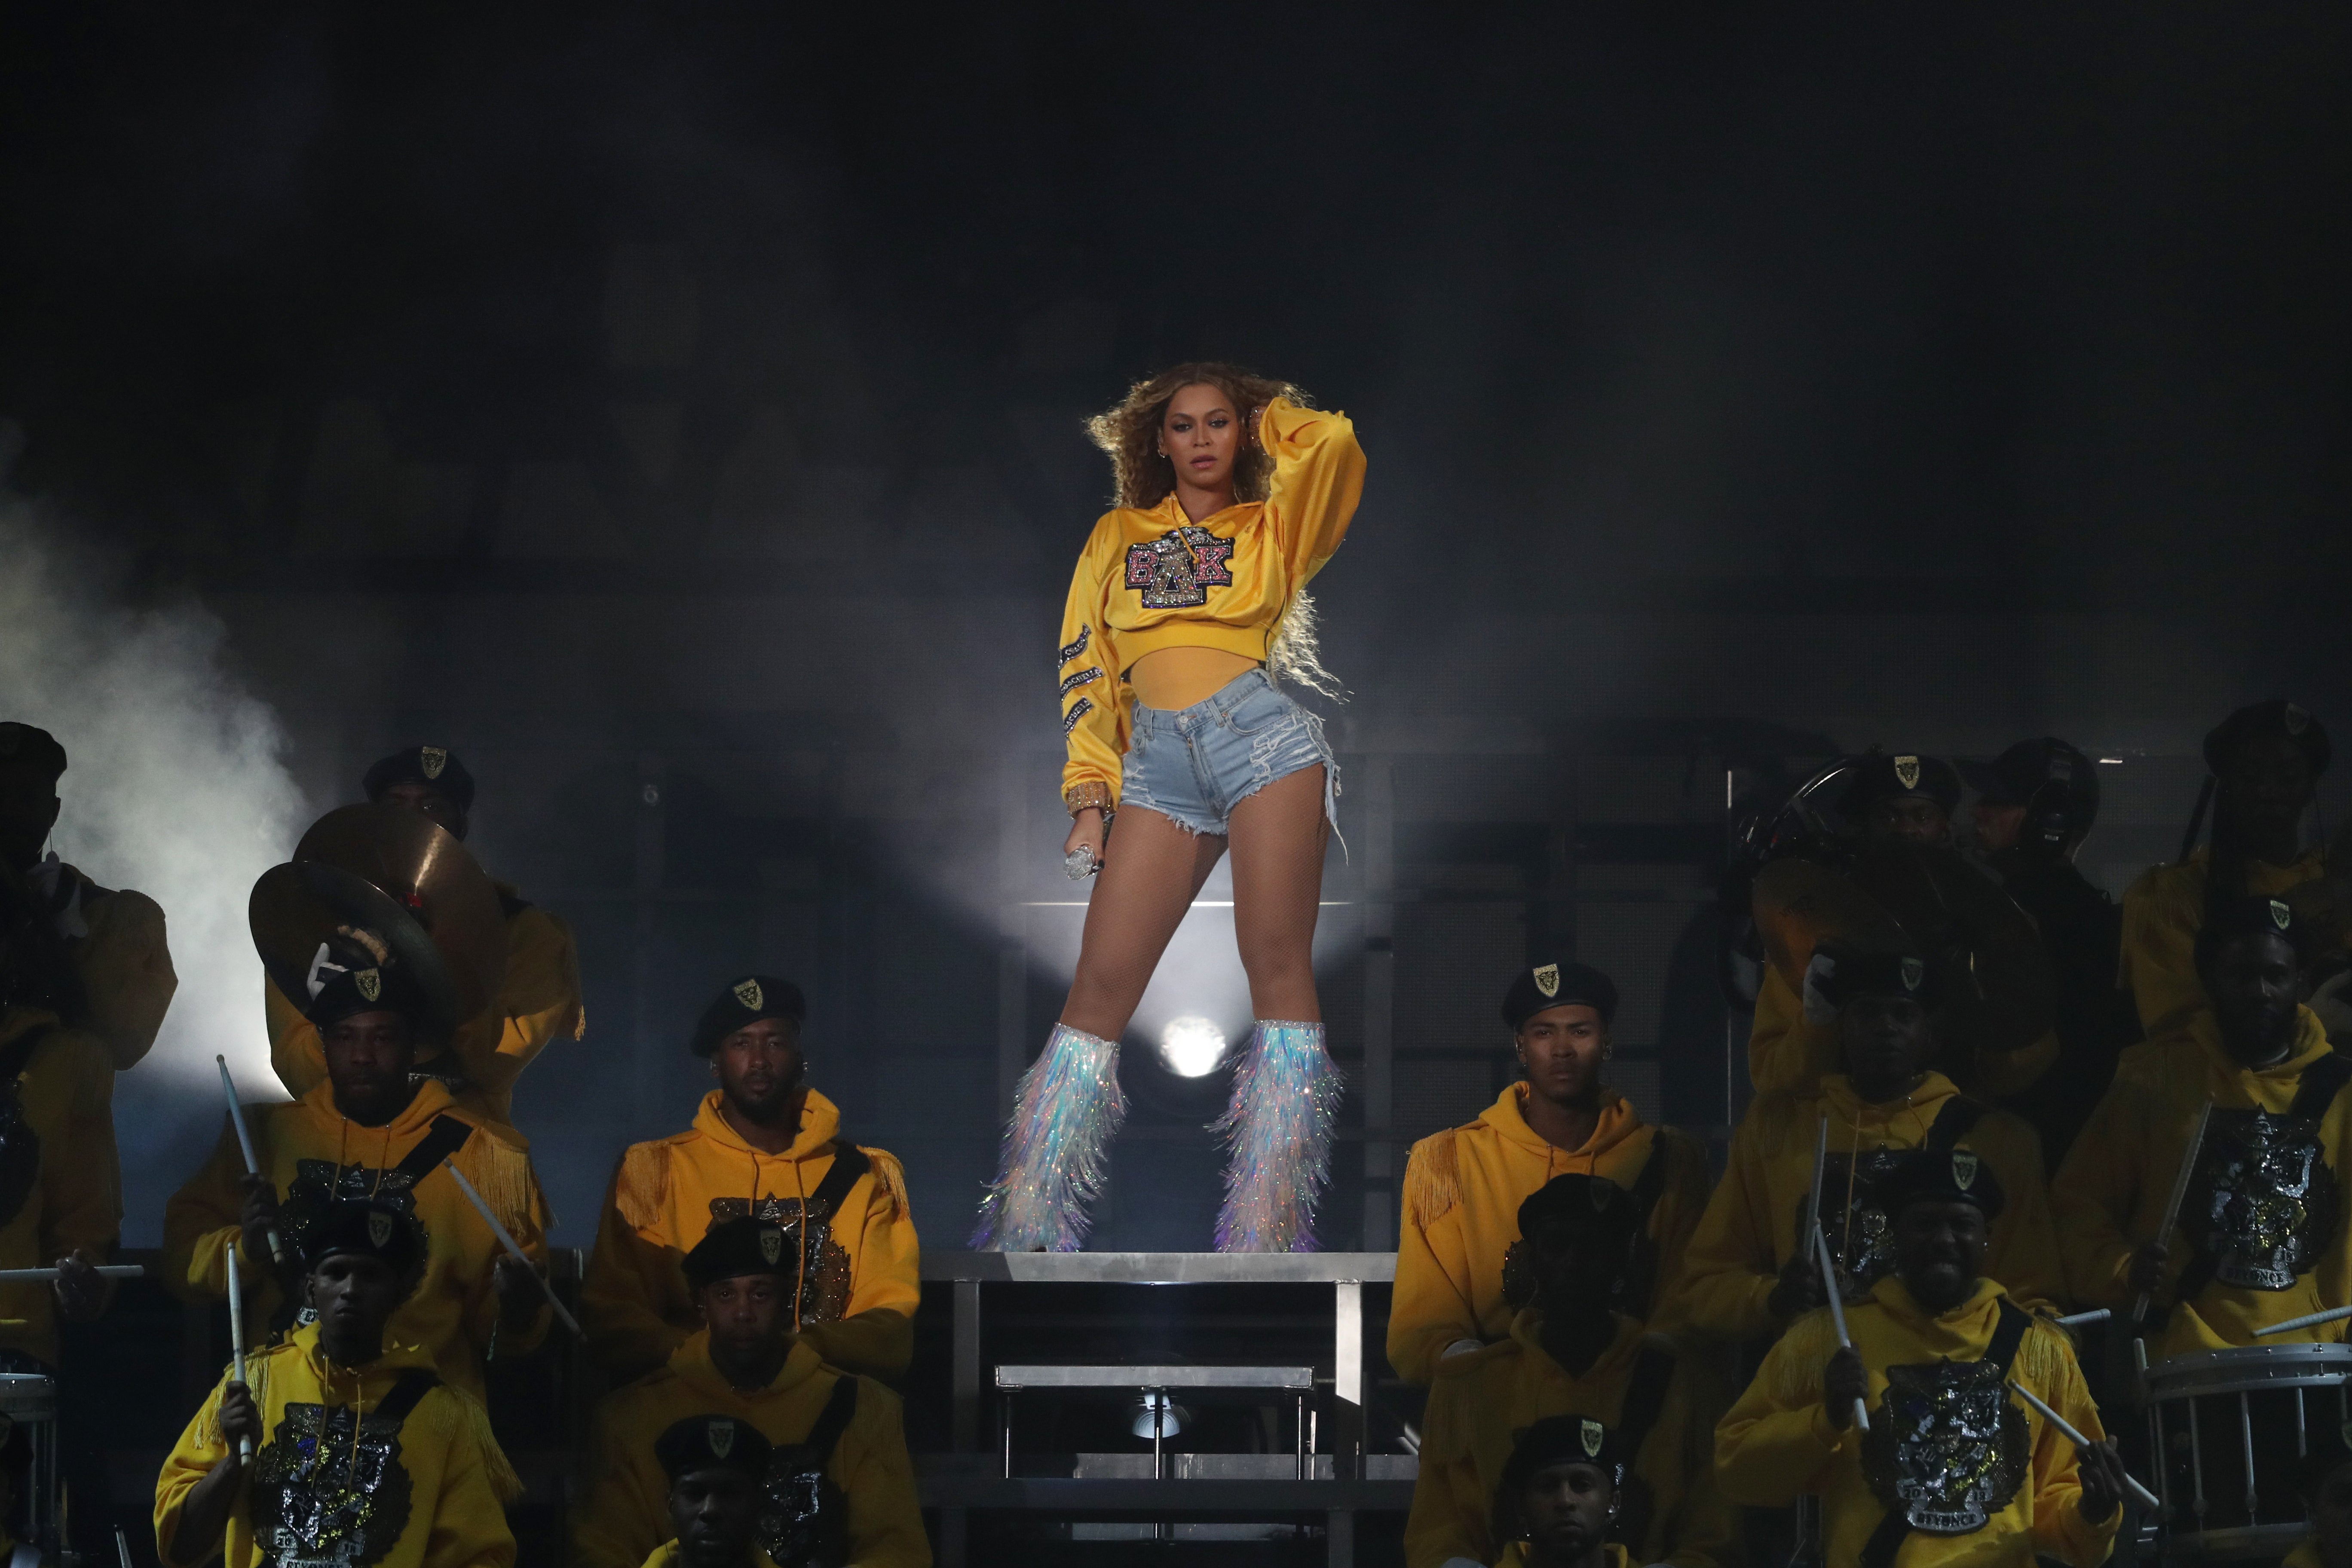 The Beyhive Were All The Way Here For #Beychella